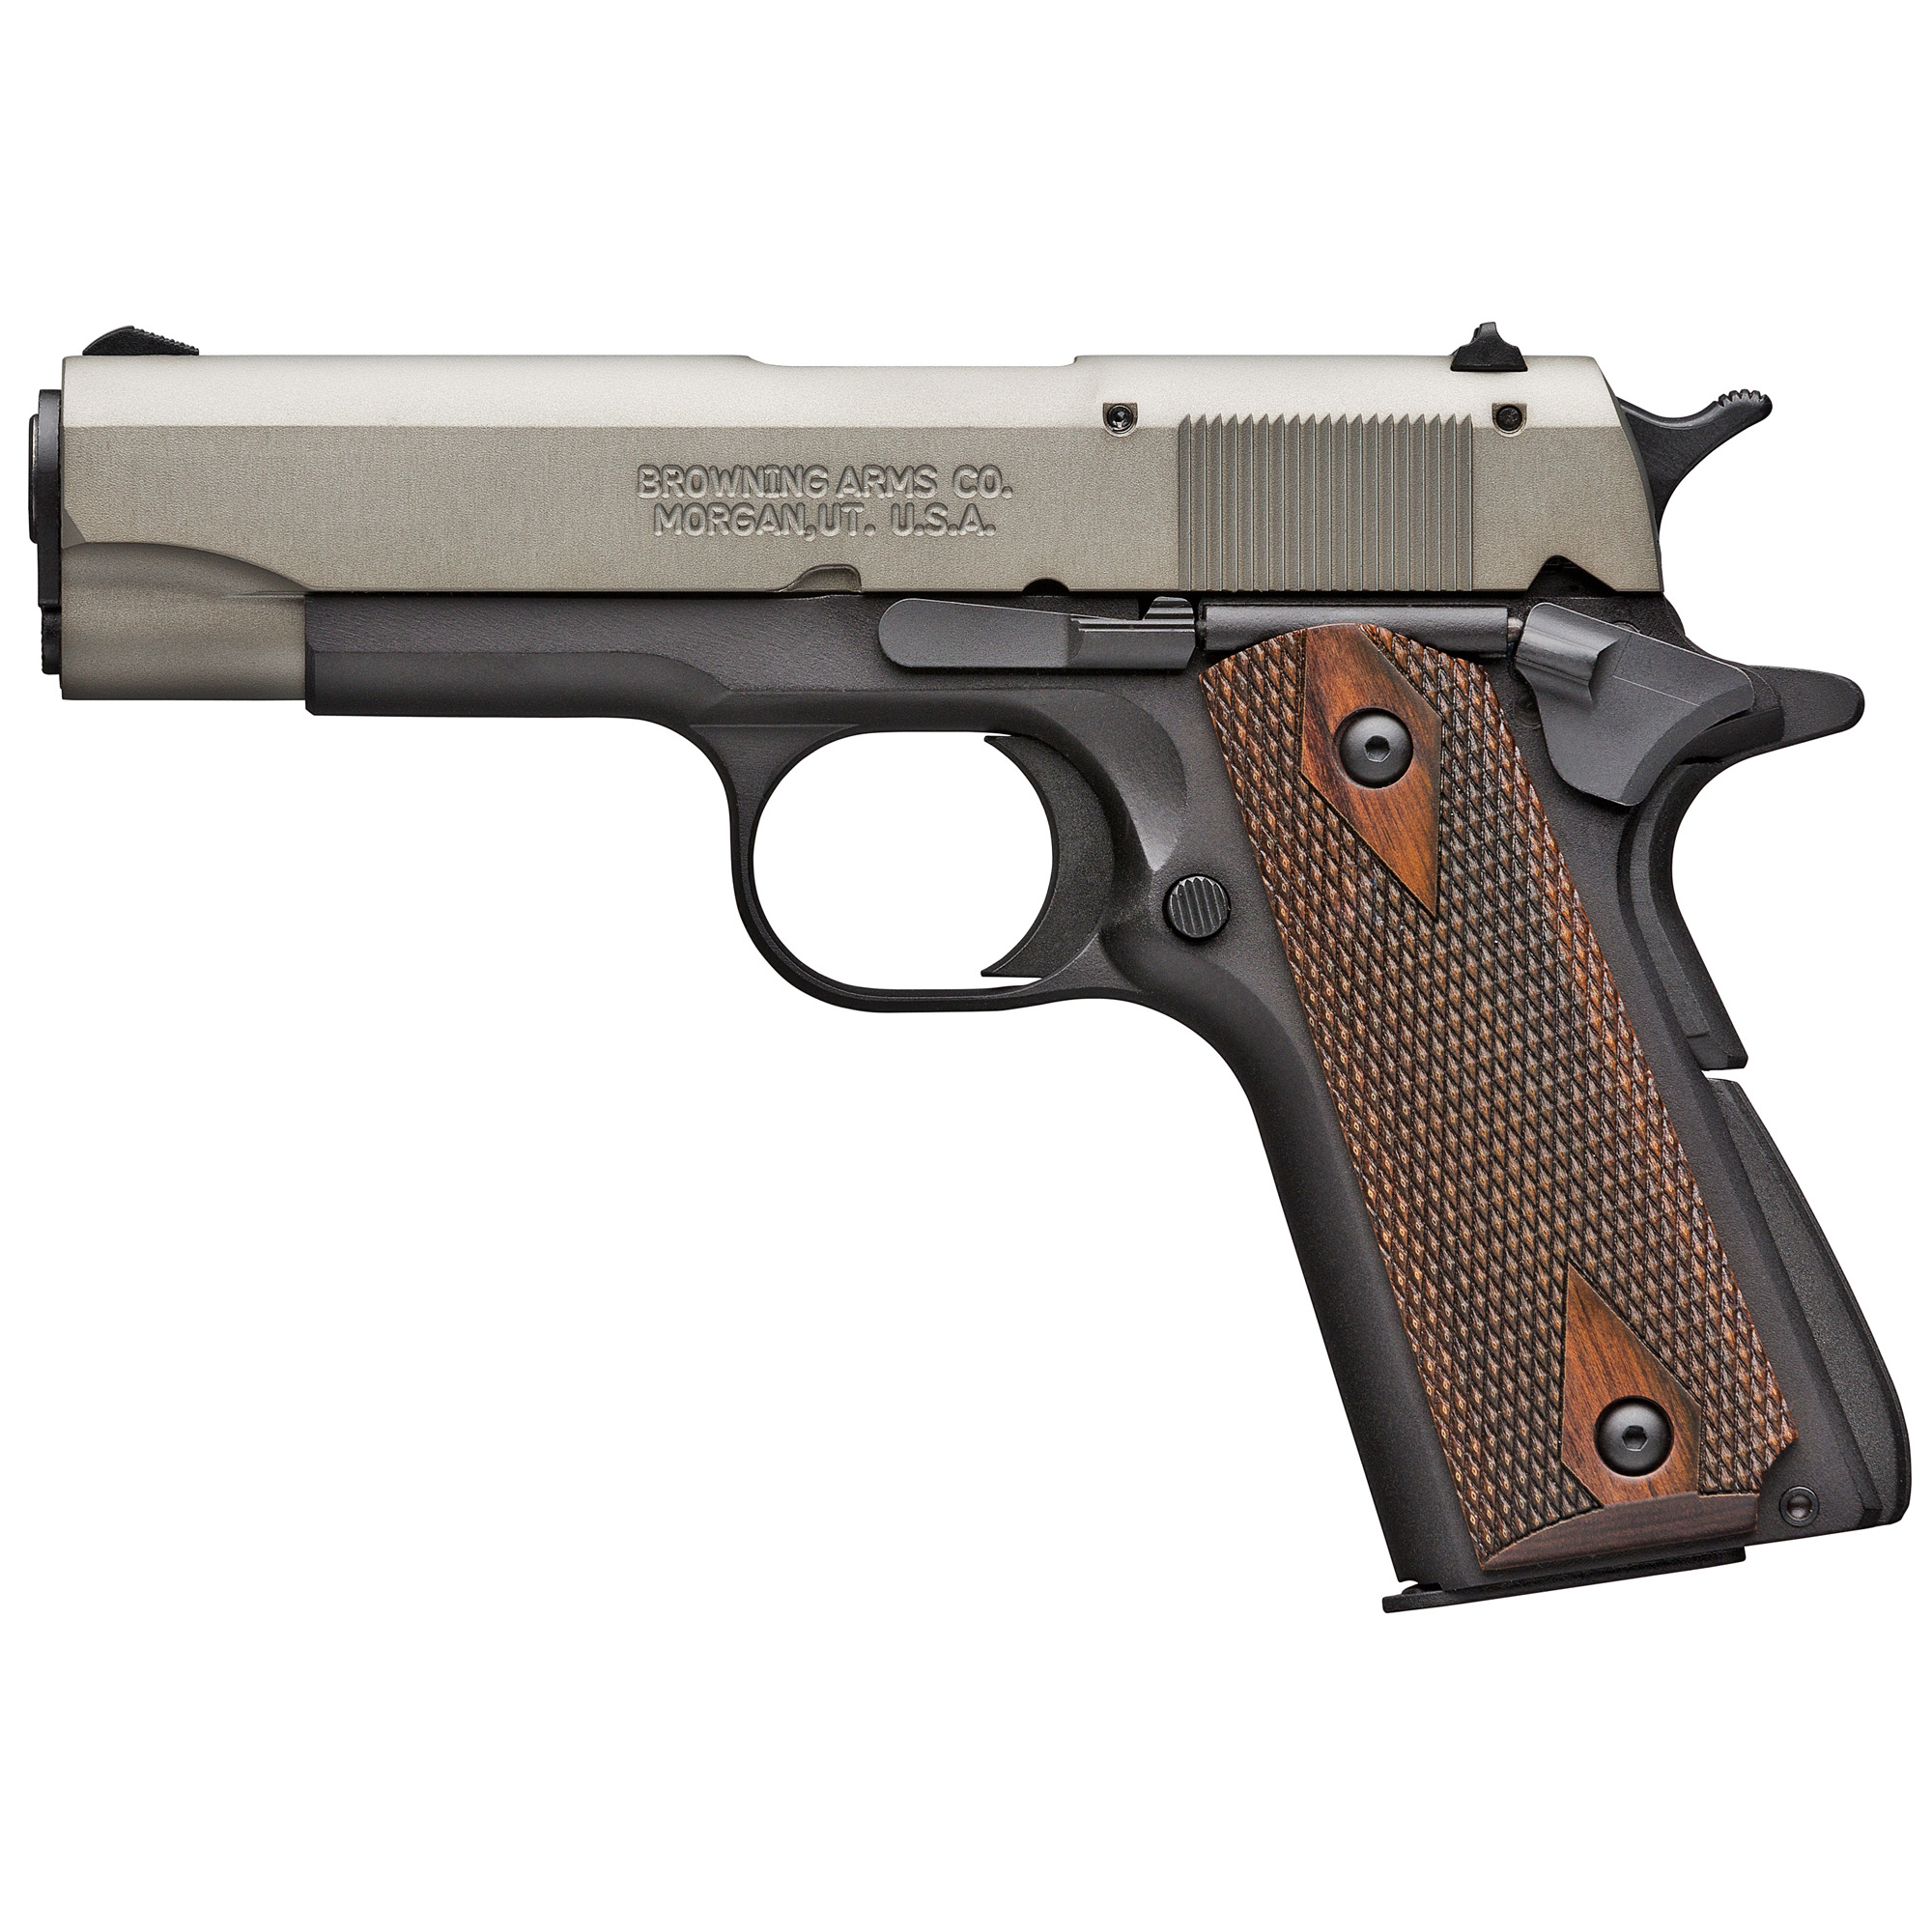 BROWNING 1911-22A1 FS 22LR 4.25 10RD GRY